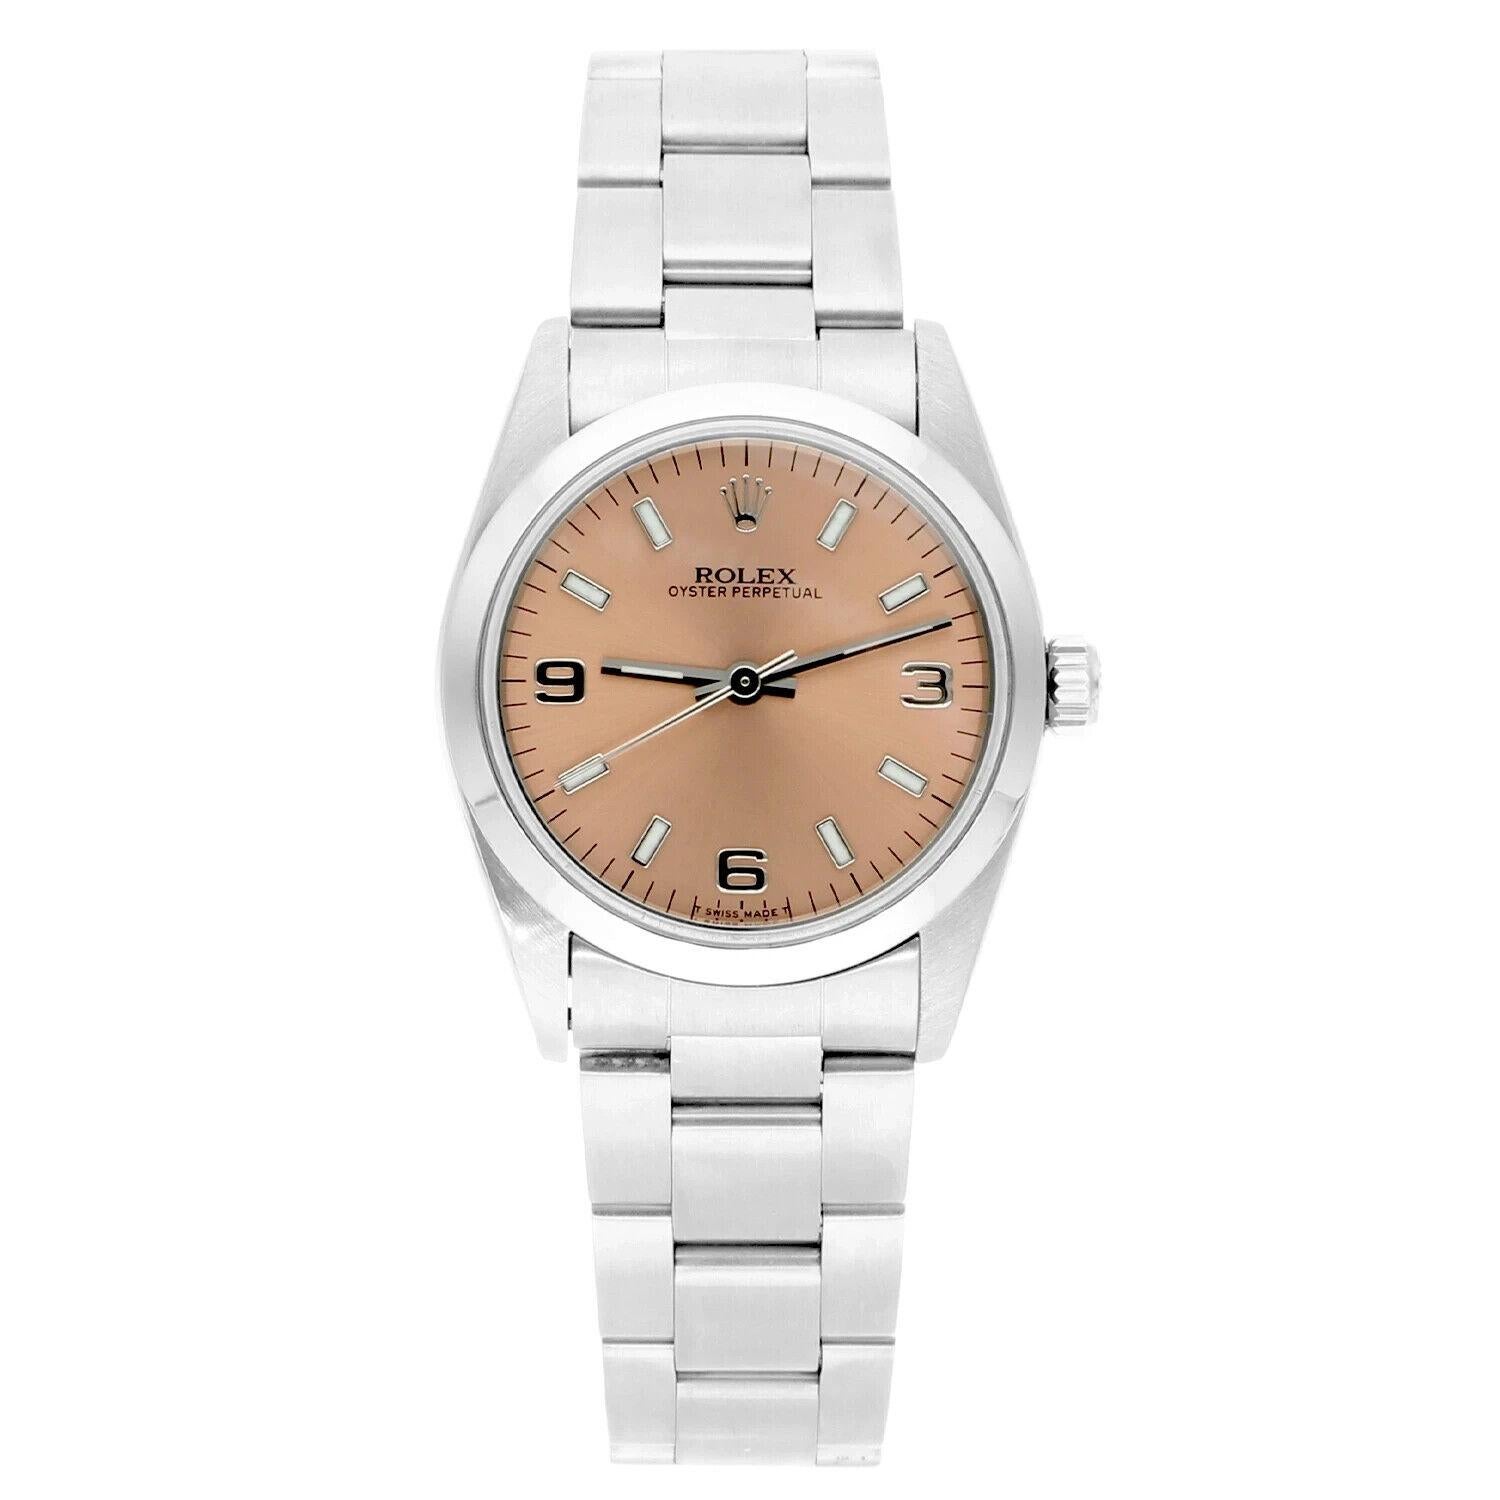 Rolex Oyster Perpetual Midsize Salmon Dial Steel Ladies Watch 77080, Circa 1999 A series.
This watch has been professionally polished, serviced and is in excellent overall condition. There are absolutely no visible scratches or blemishes.